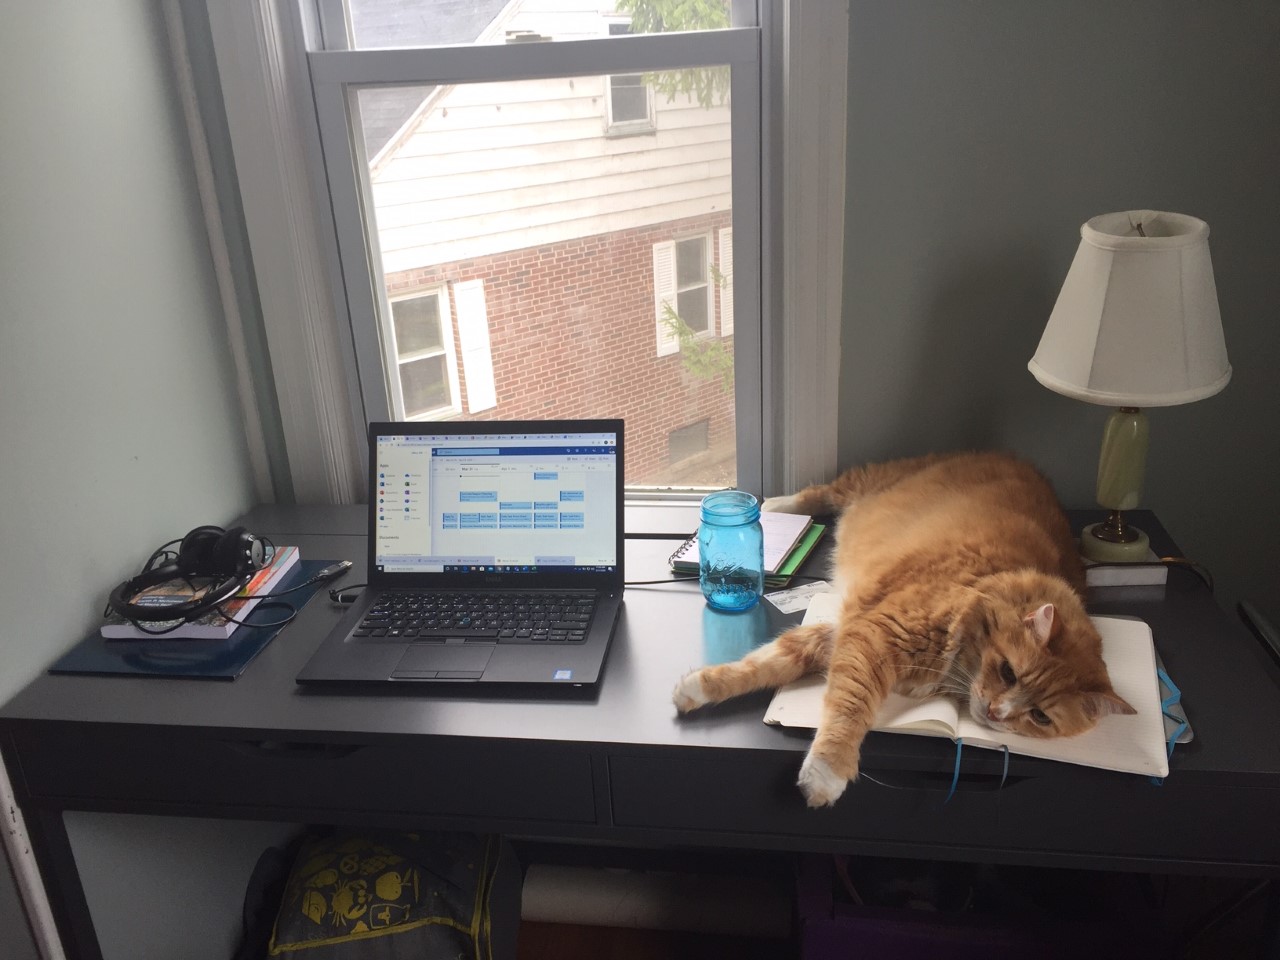 A laptop and a cat on a desk next to a window